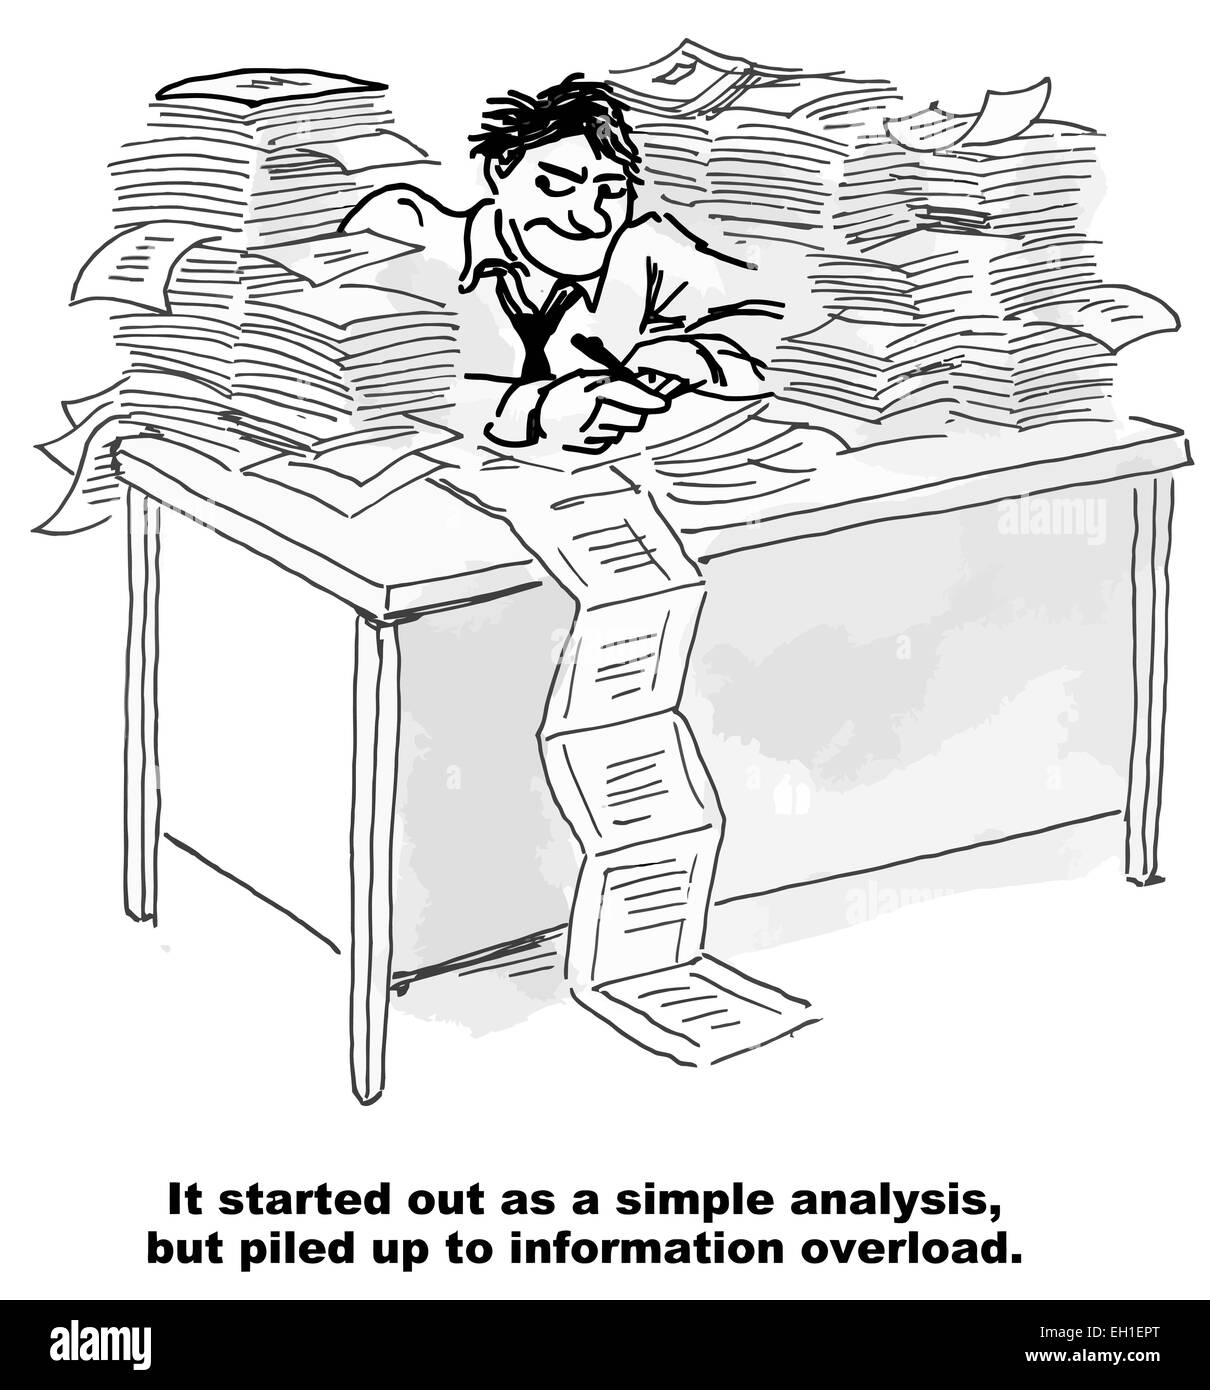 Cartoon Of Businessman With Piles Of Paper On His Desk It Started